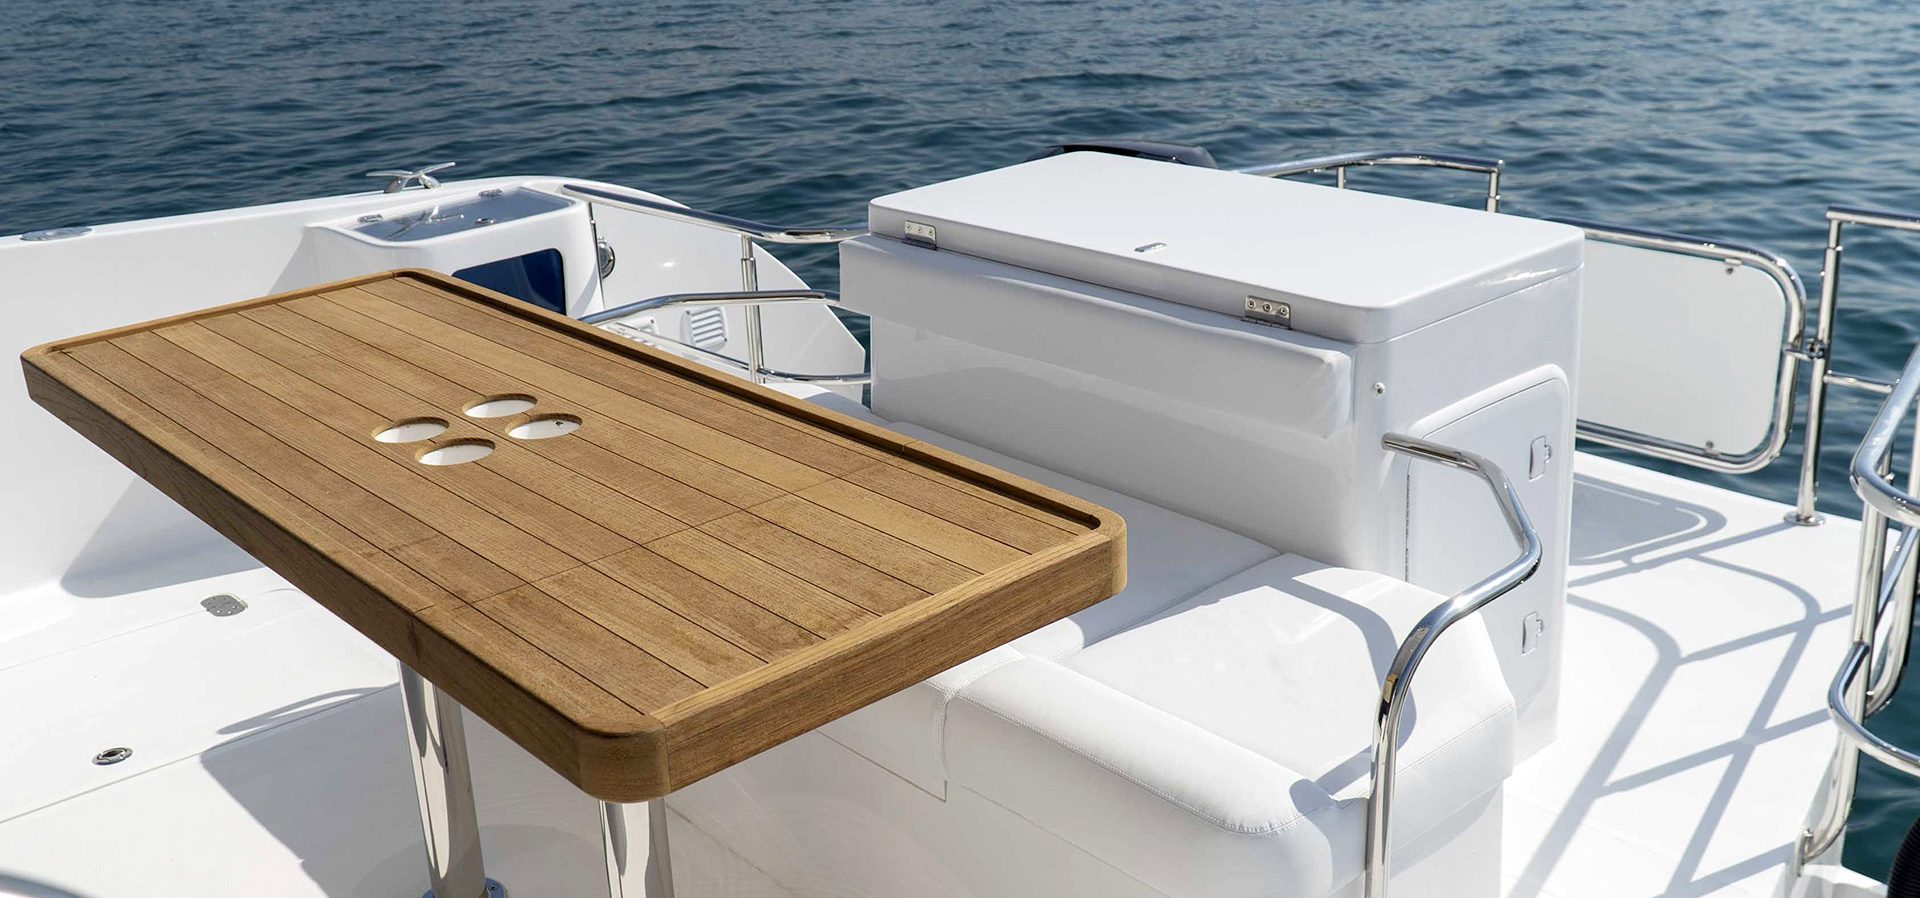 SilverCat 40 LUX - Aft Seating Area